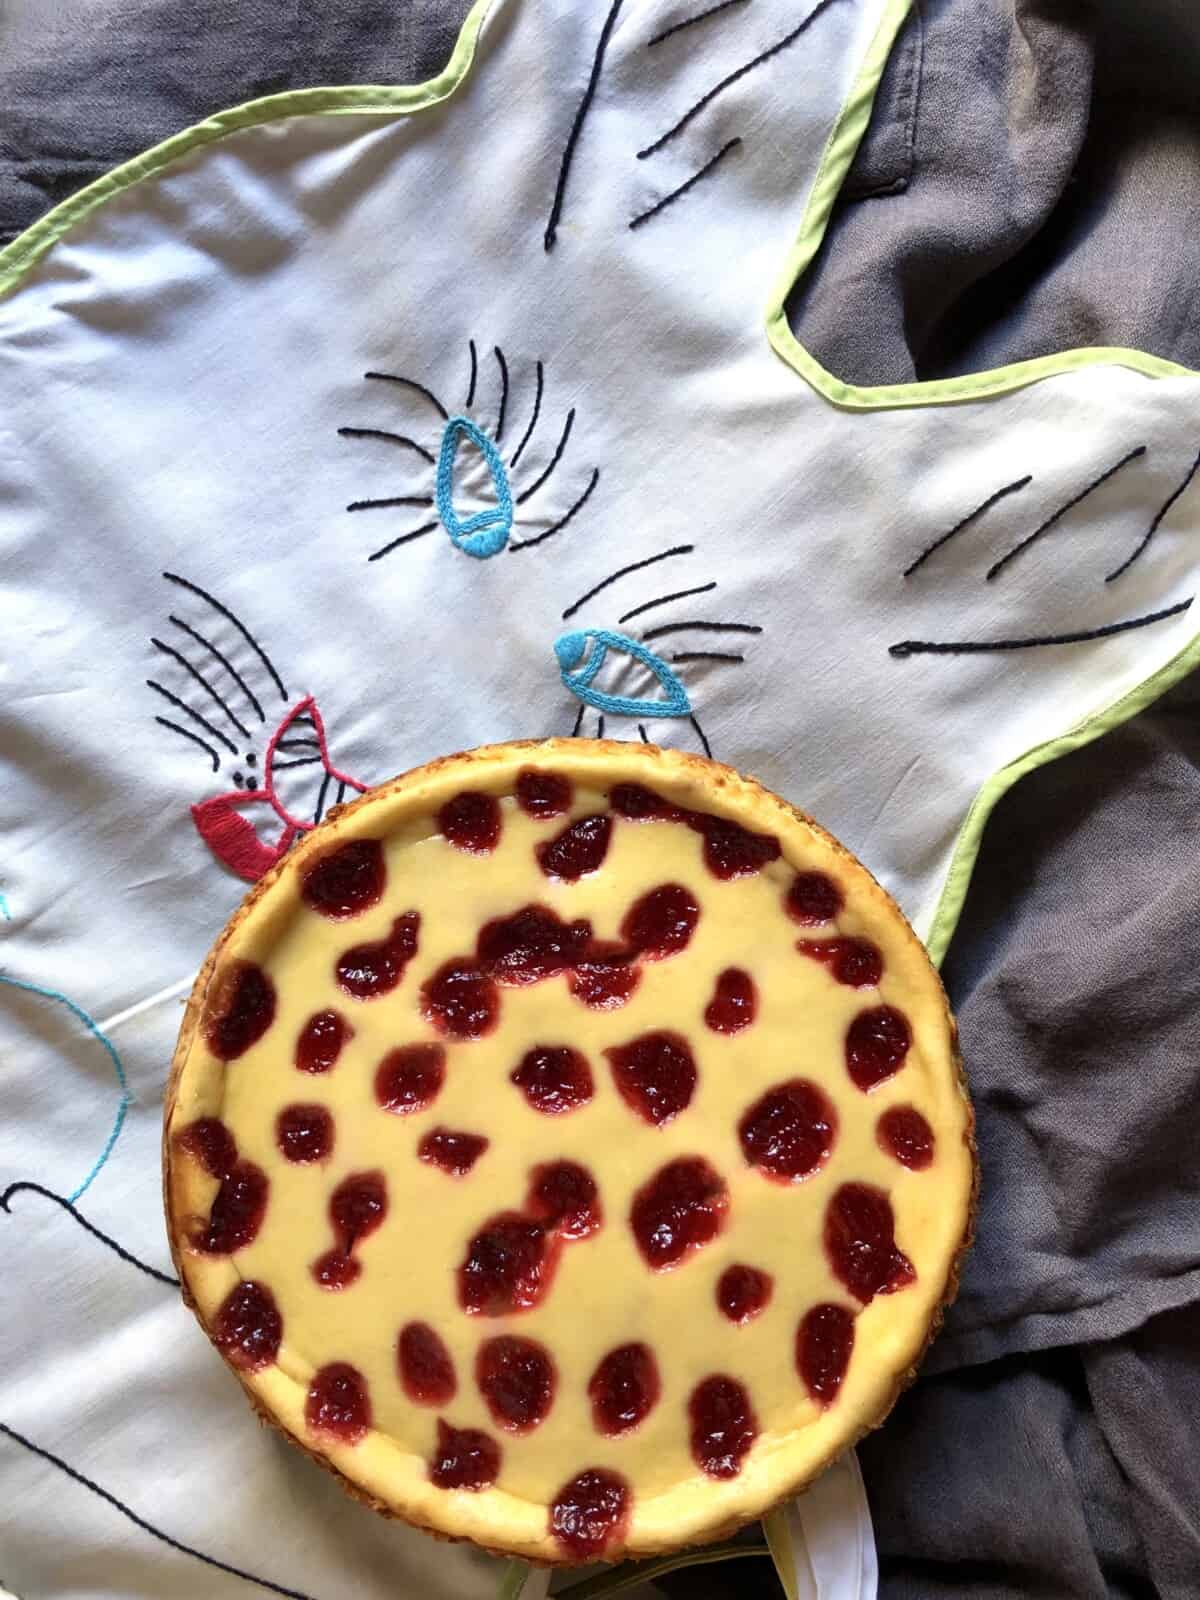 Strawberry cheesecake dotted with homemade strawberry jam dotting the top and baked in sitting on top of my granny's crazy bunny apron that she cut, sewed, and embroidered.